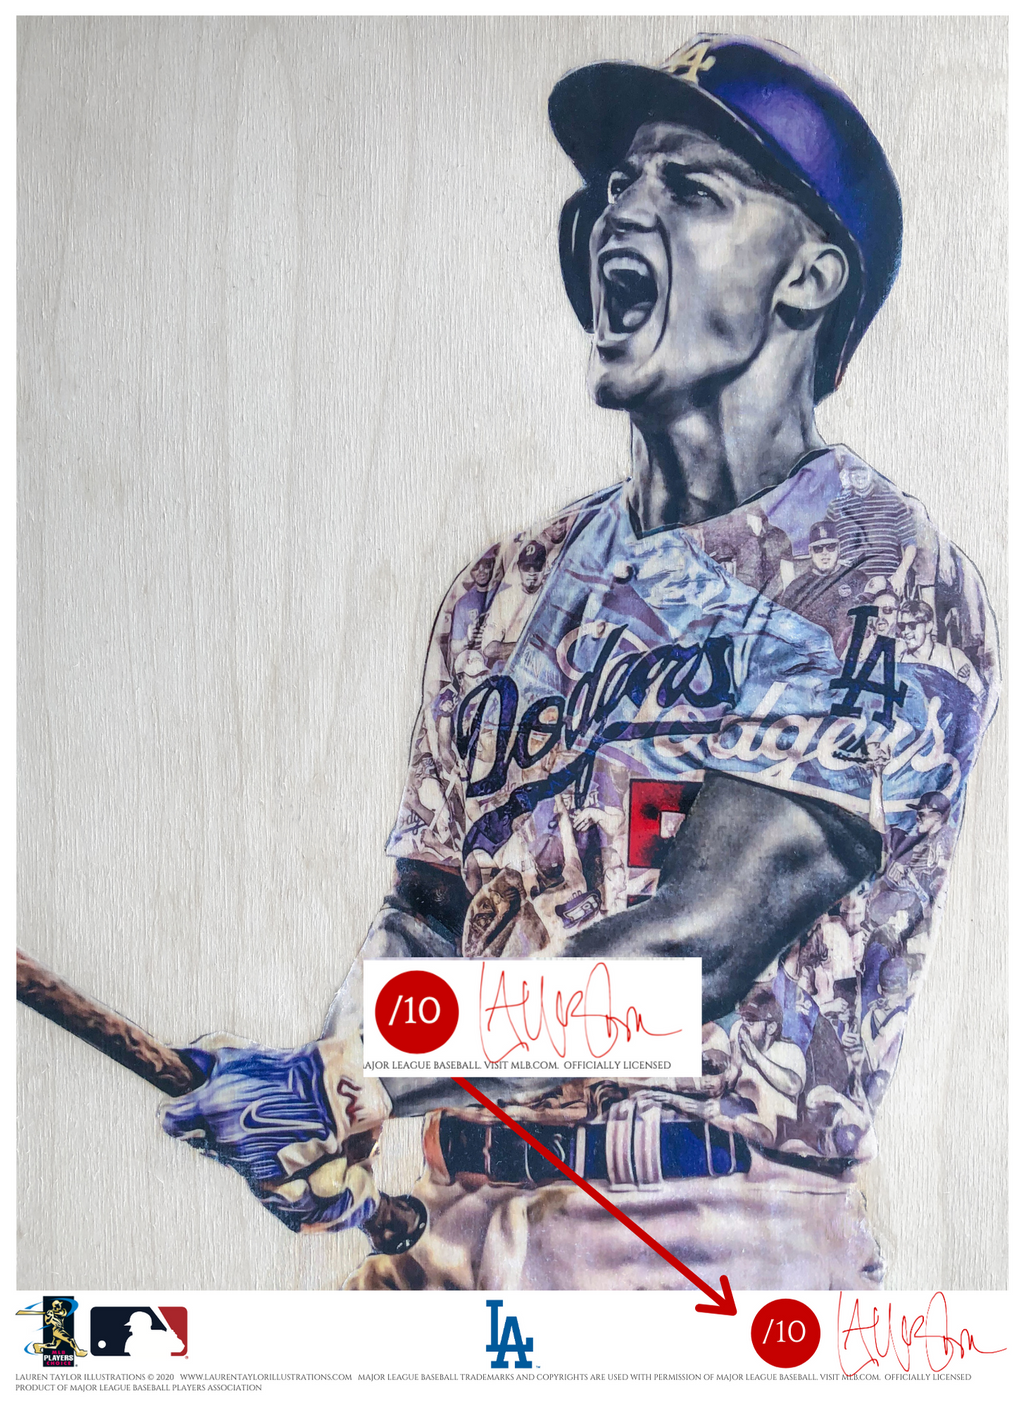 "C-Seag" (Corey Seager) Los Angeles Dodgers - Officially Licensed MLB Print - RED SIGNATURE LIMITED RELEASE /10